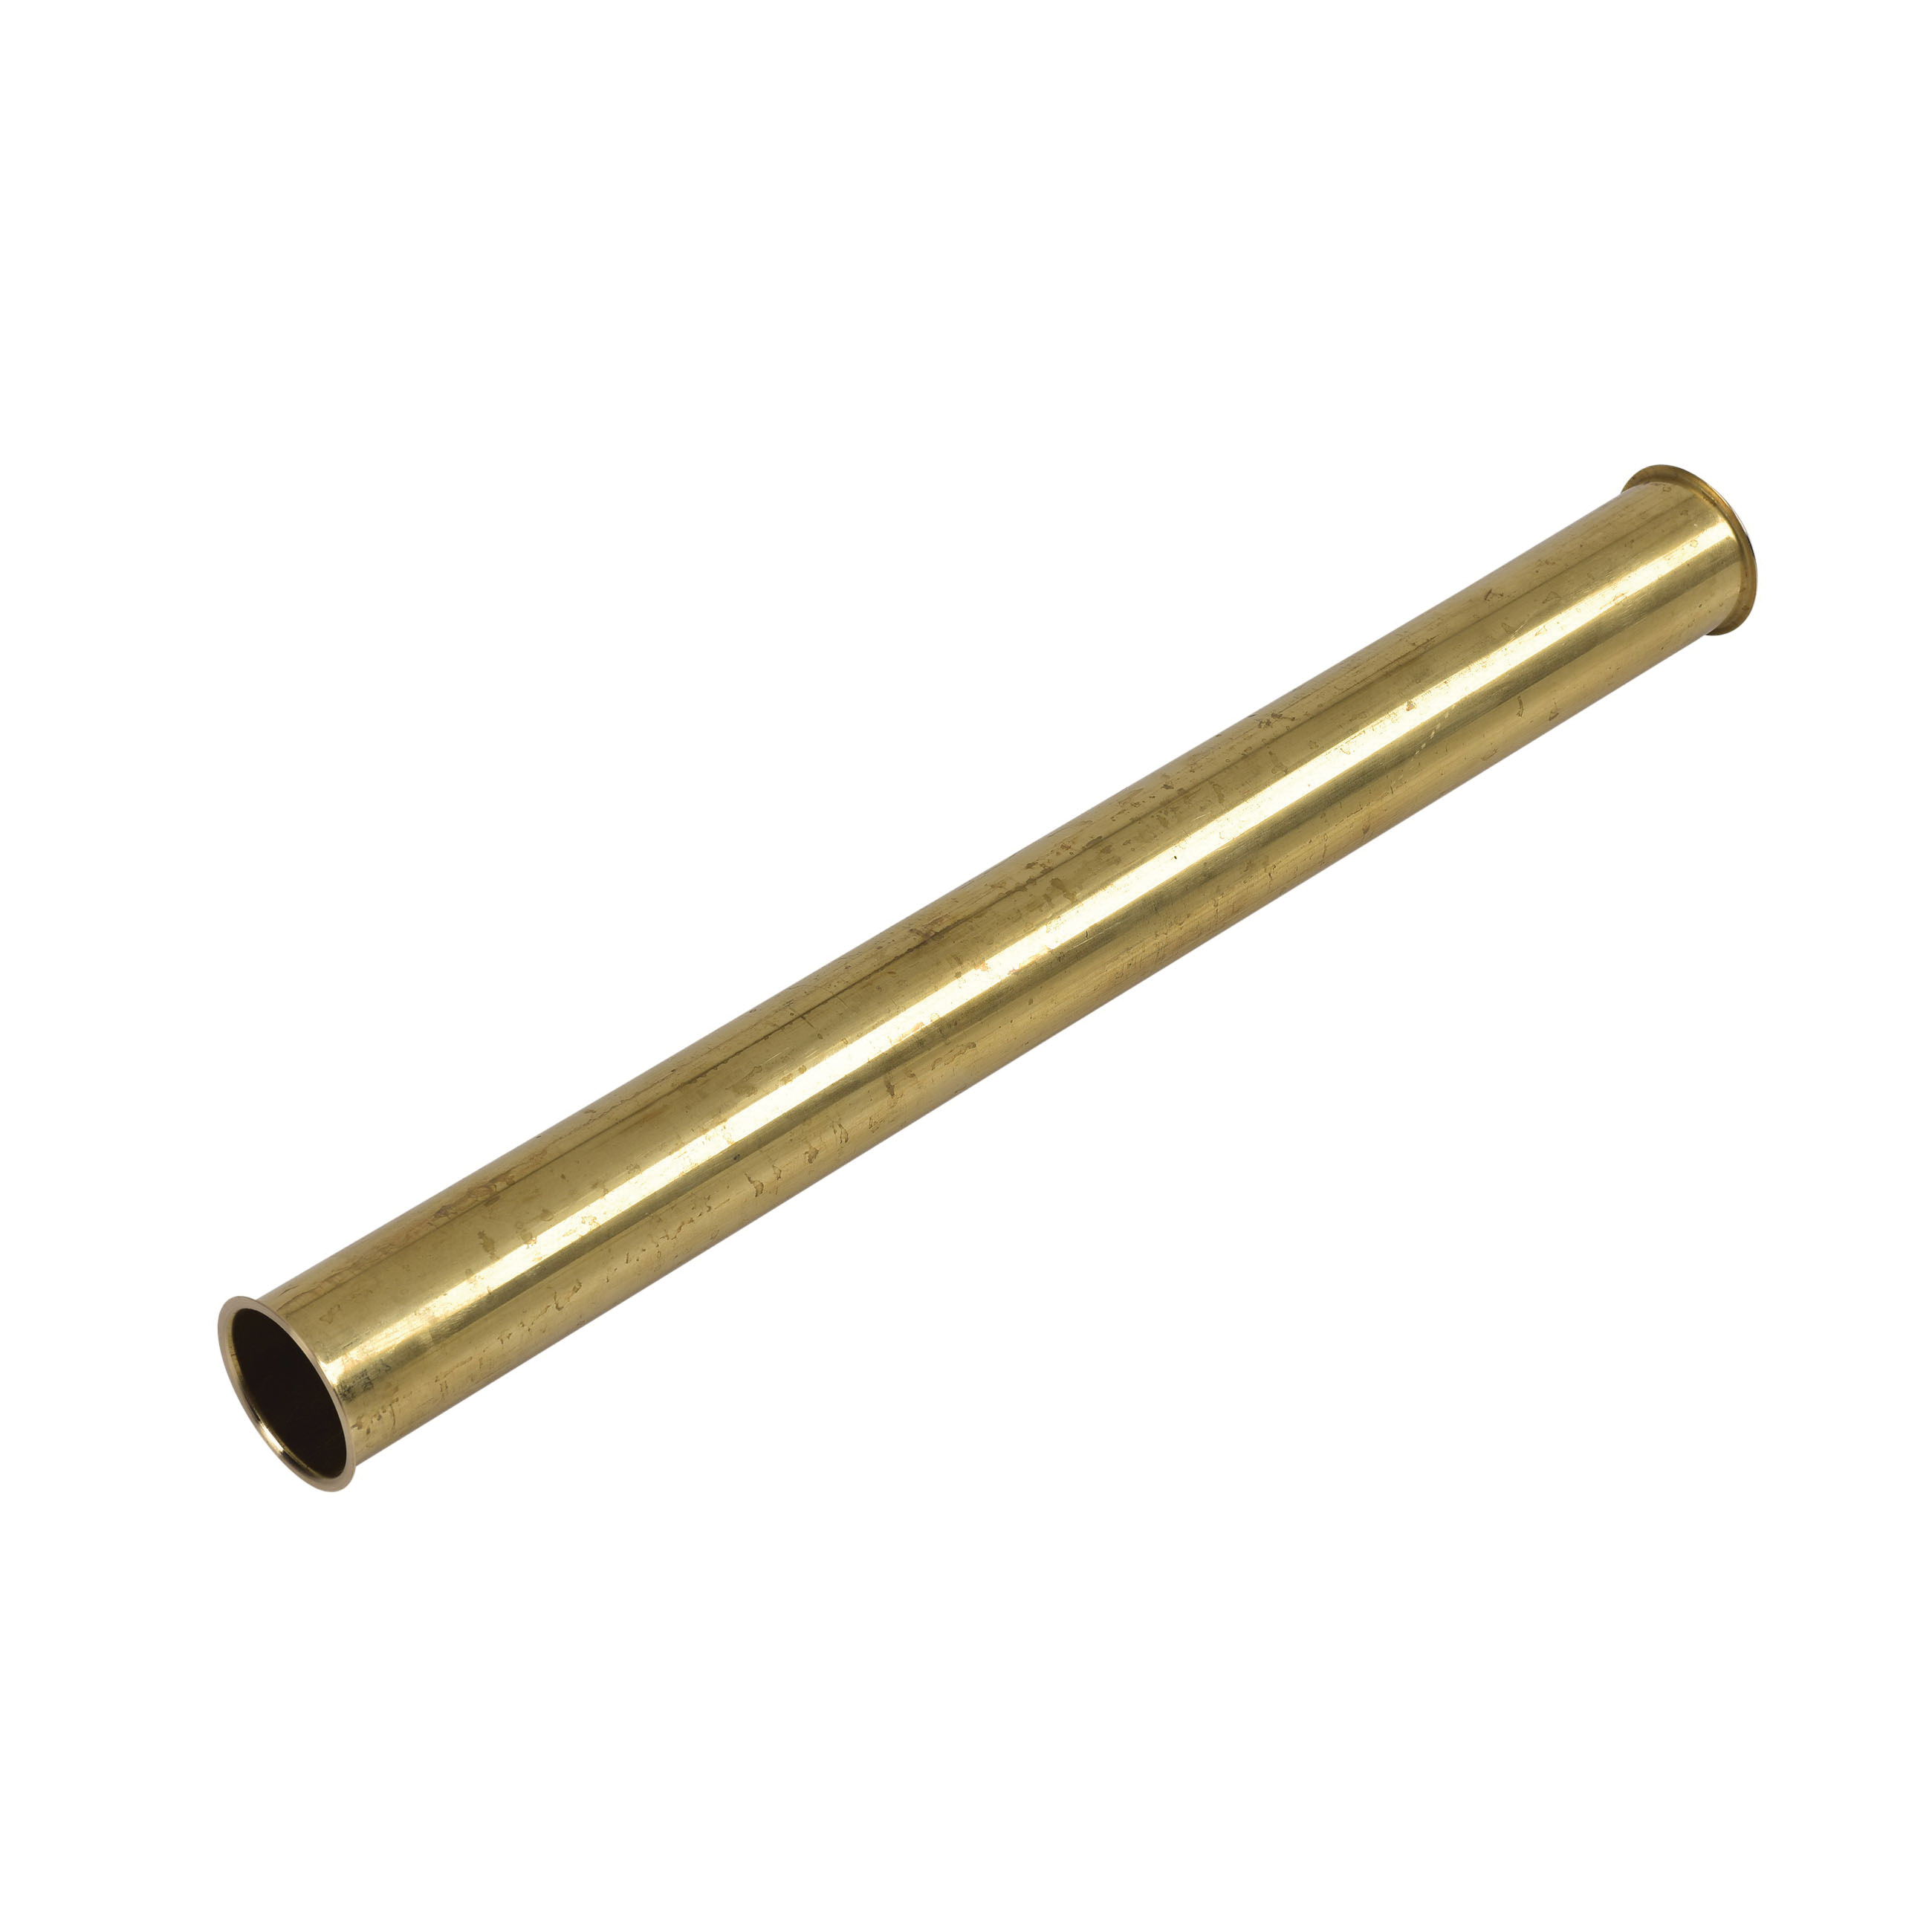 Dearborn® 803ED-20-3 Strainer Tailpiece, 1-1/2 in Pipe, 16 in L, 20 ga, Double Flanged/Slip Joint/Solvent Weld Connection, Brass, Import